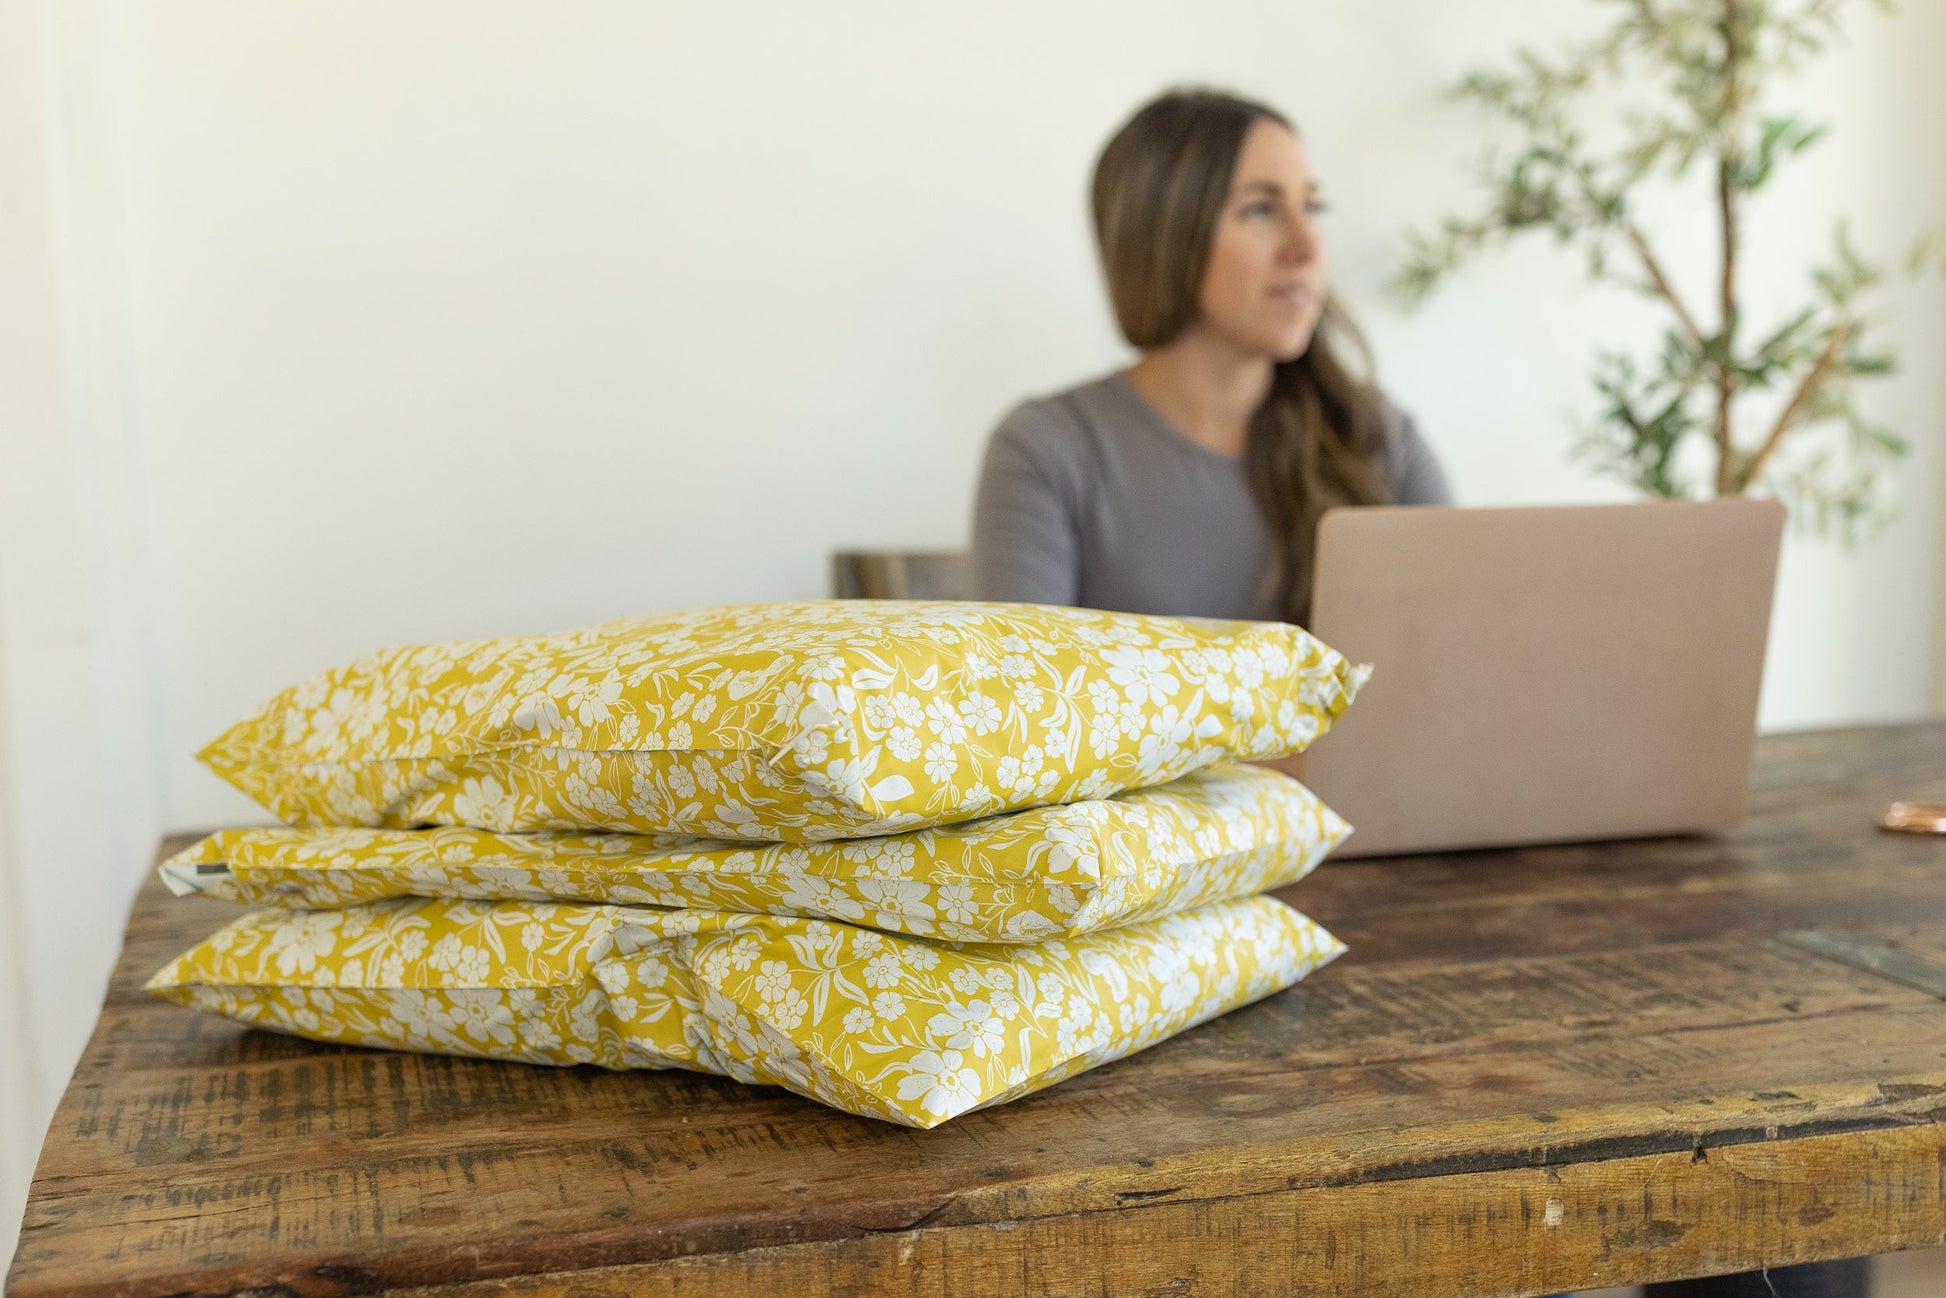 A stack of fulfilled orders, a pretty business brand photo with yellow floral polymailer bags.